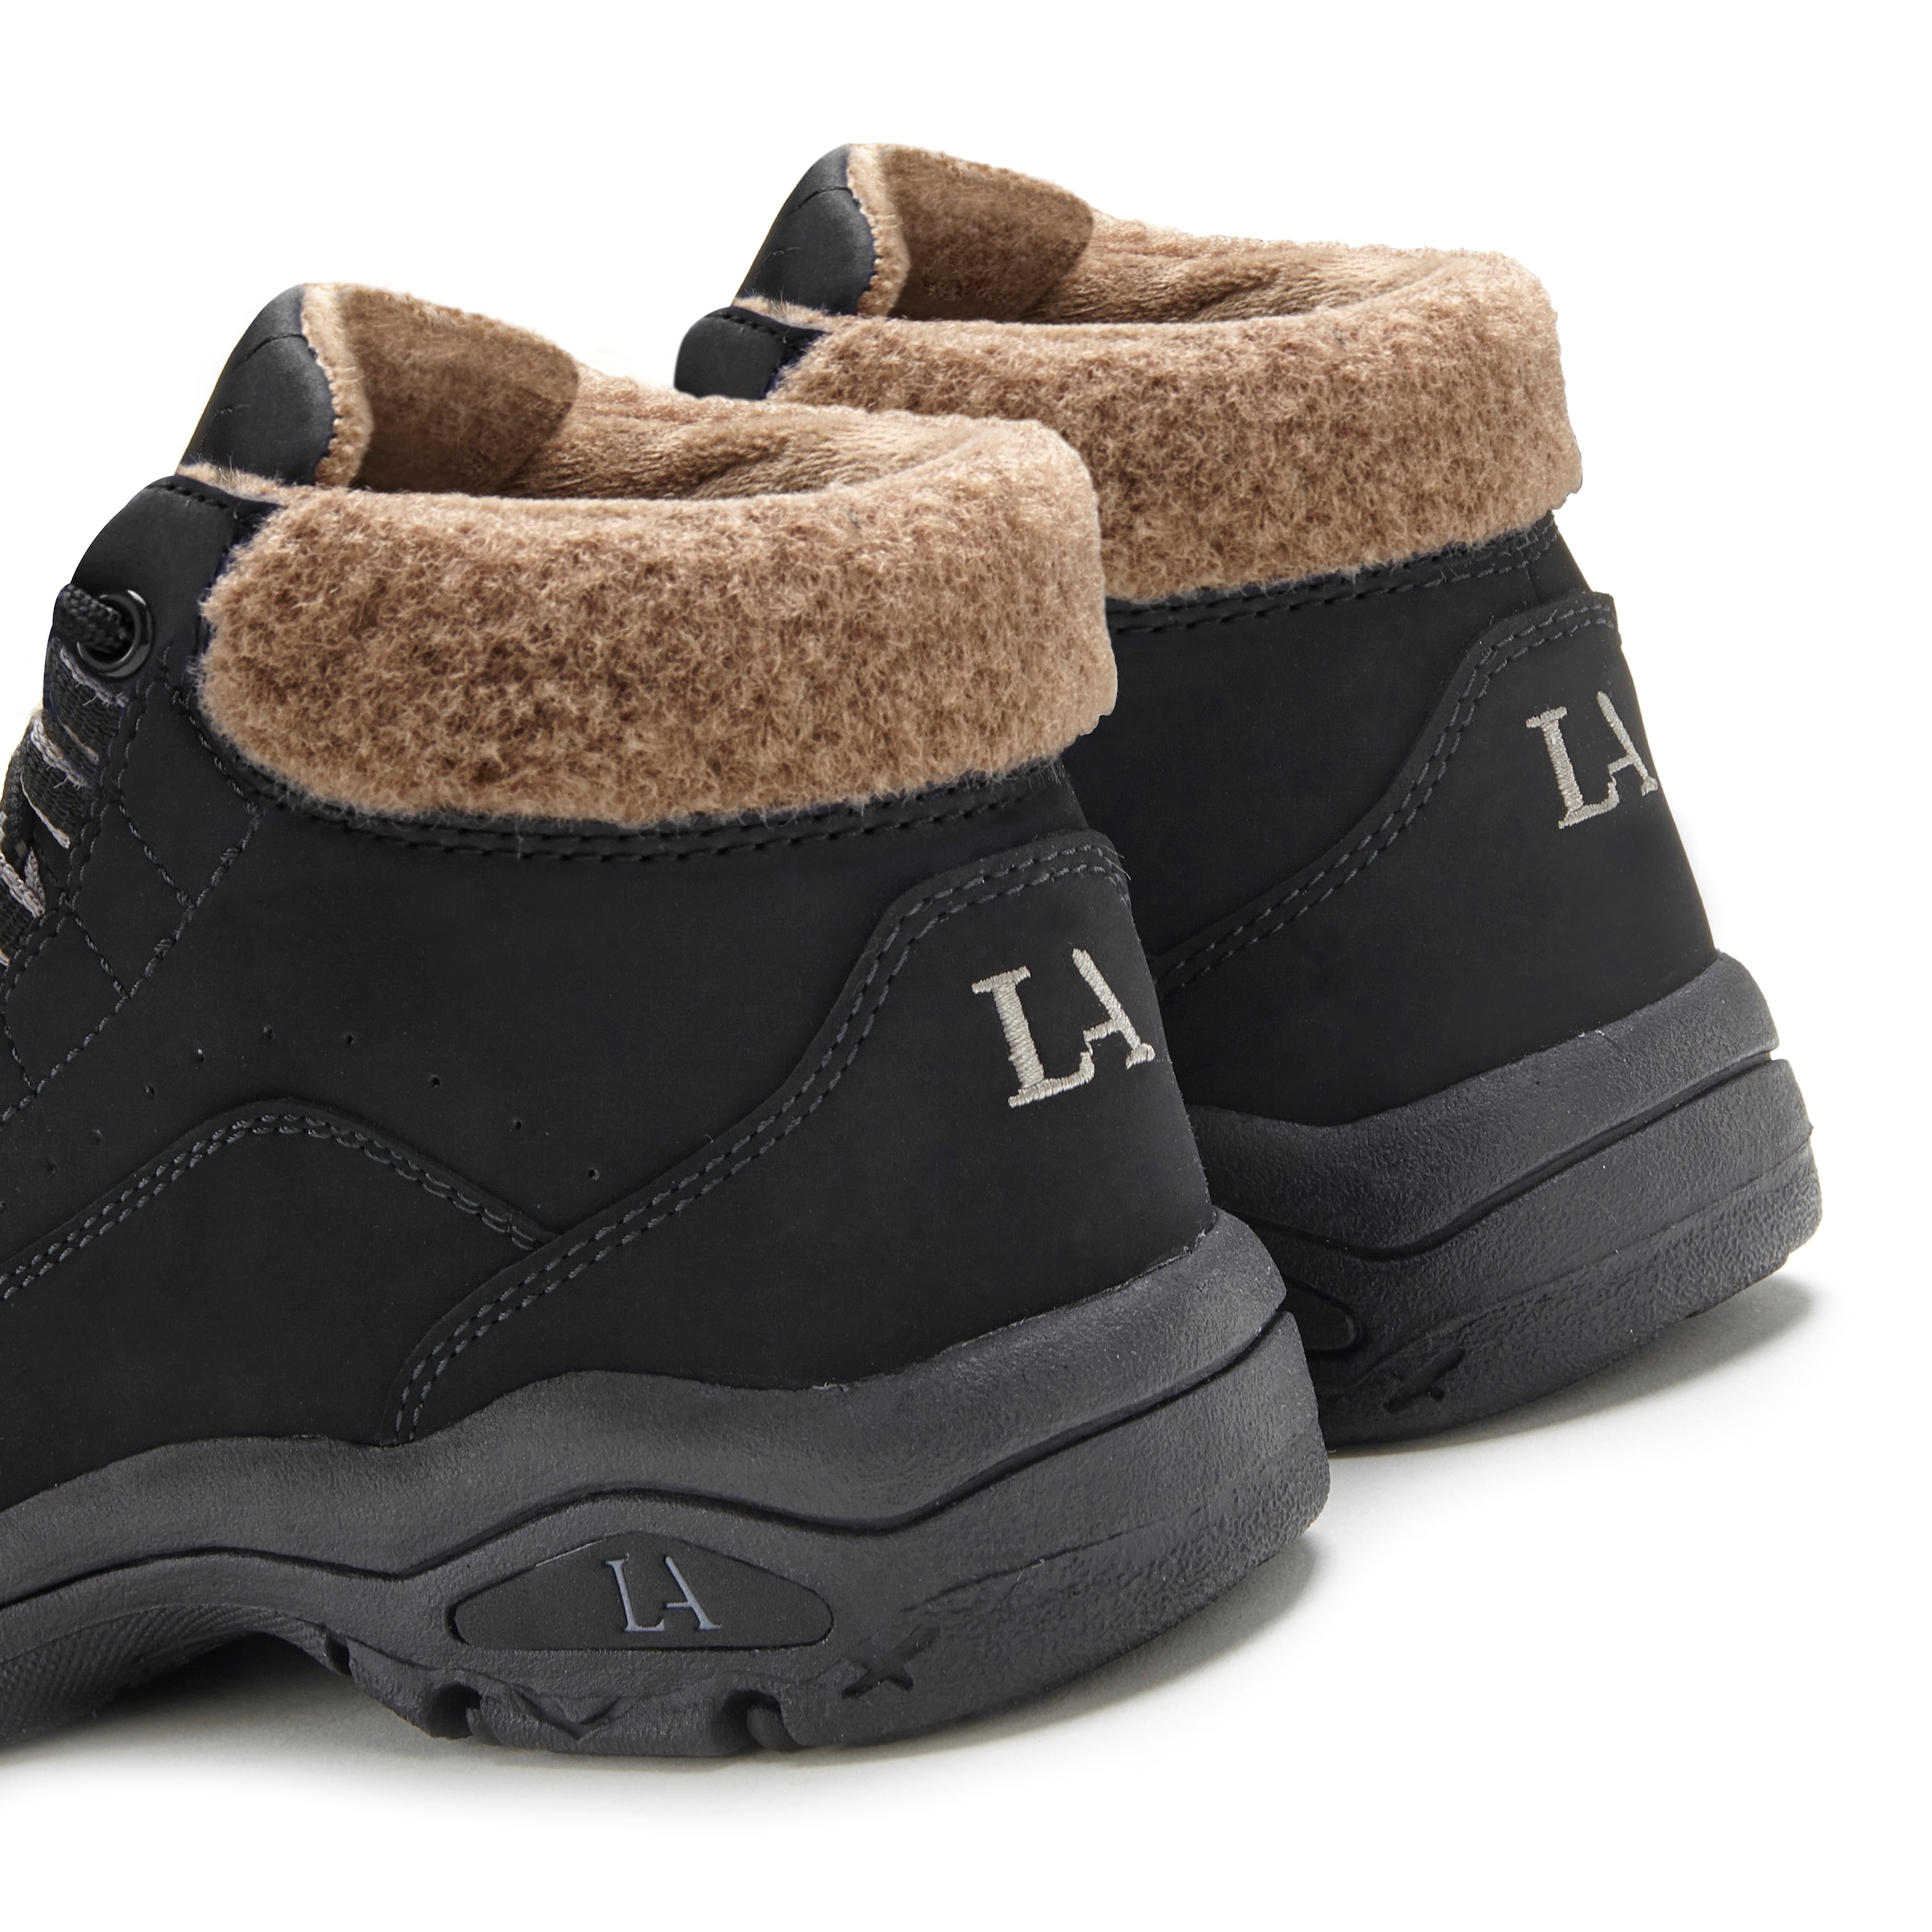 LASCANA Winterstiefelette, mit robuster Sohle, kuscheliges Warmfutter,Outdoor Boots,Ankle Sneaker